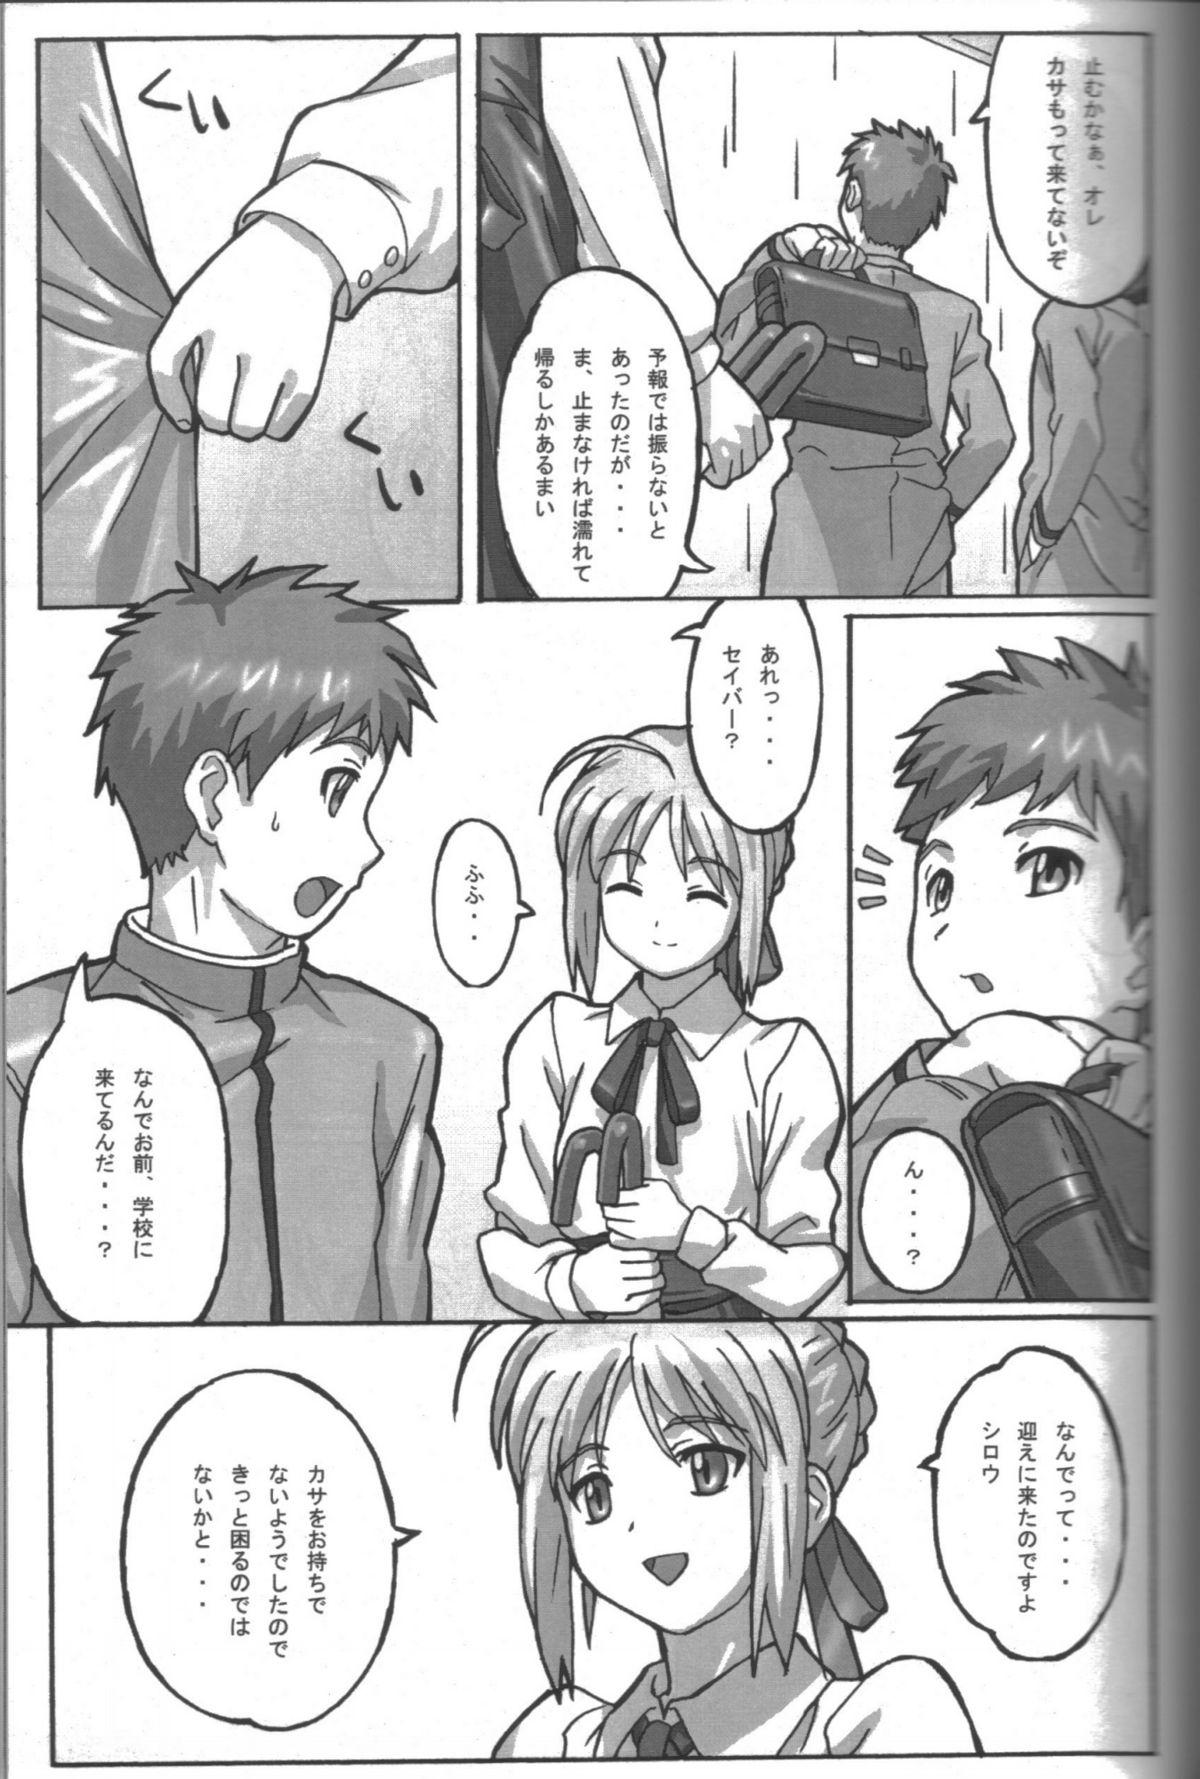 Ffm A PIECE OF CAKE - Fate stay night Amateur Blow Job - Page 6